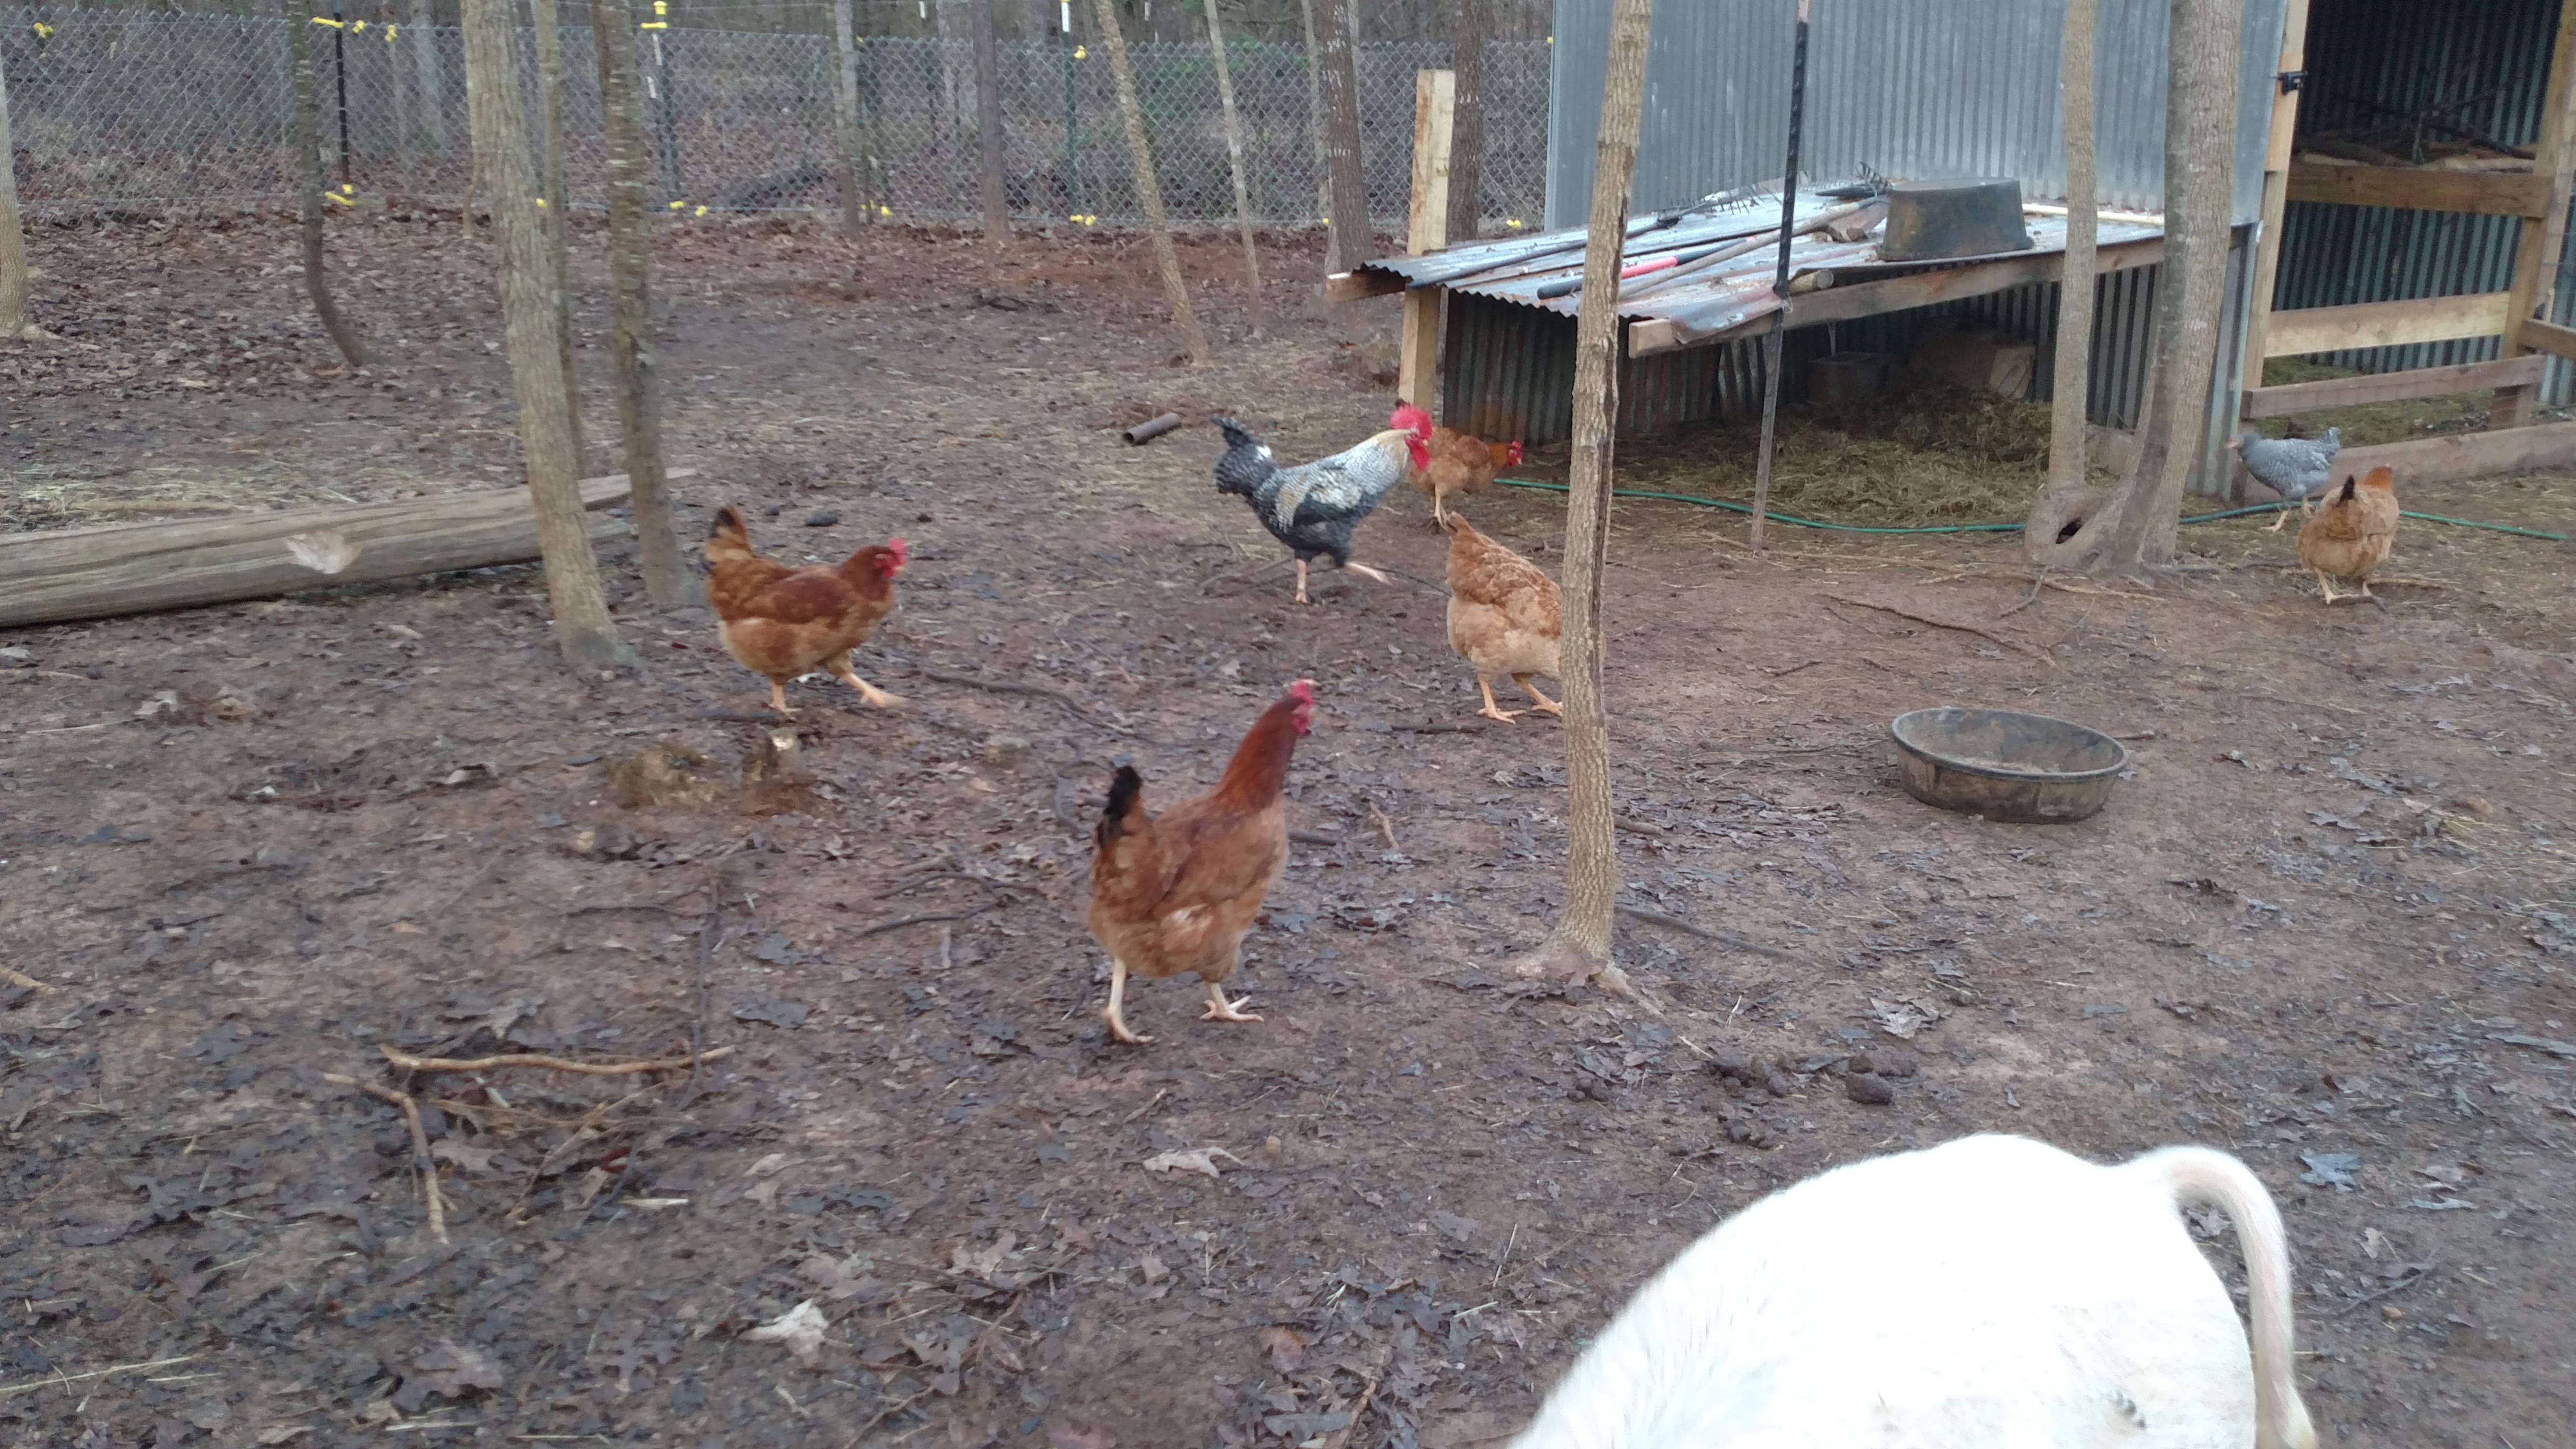 Have 5 large red hens in same pen.  They are about 6 months old I think.  Had one lay an egg couple days ago.